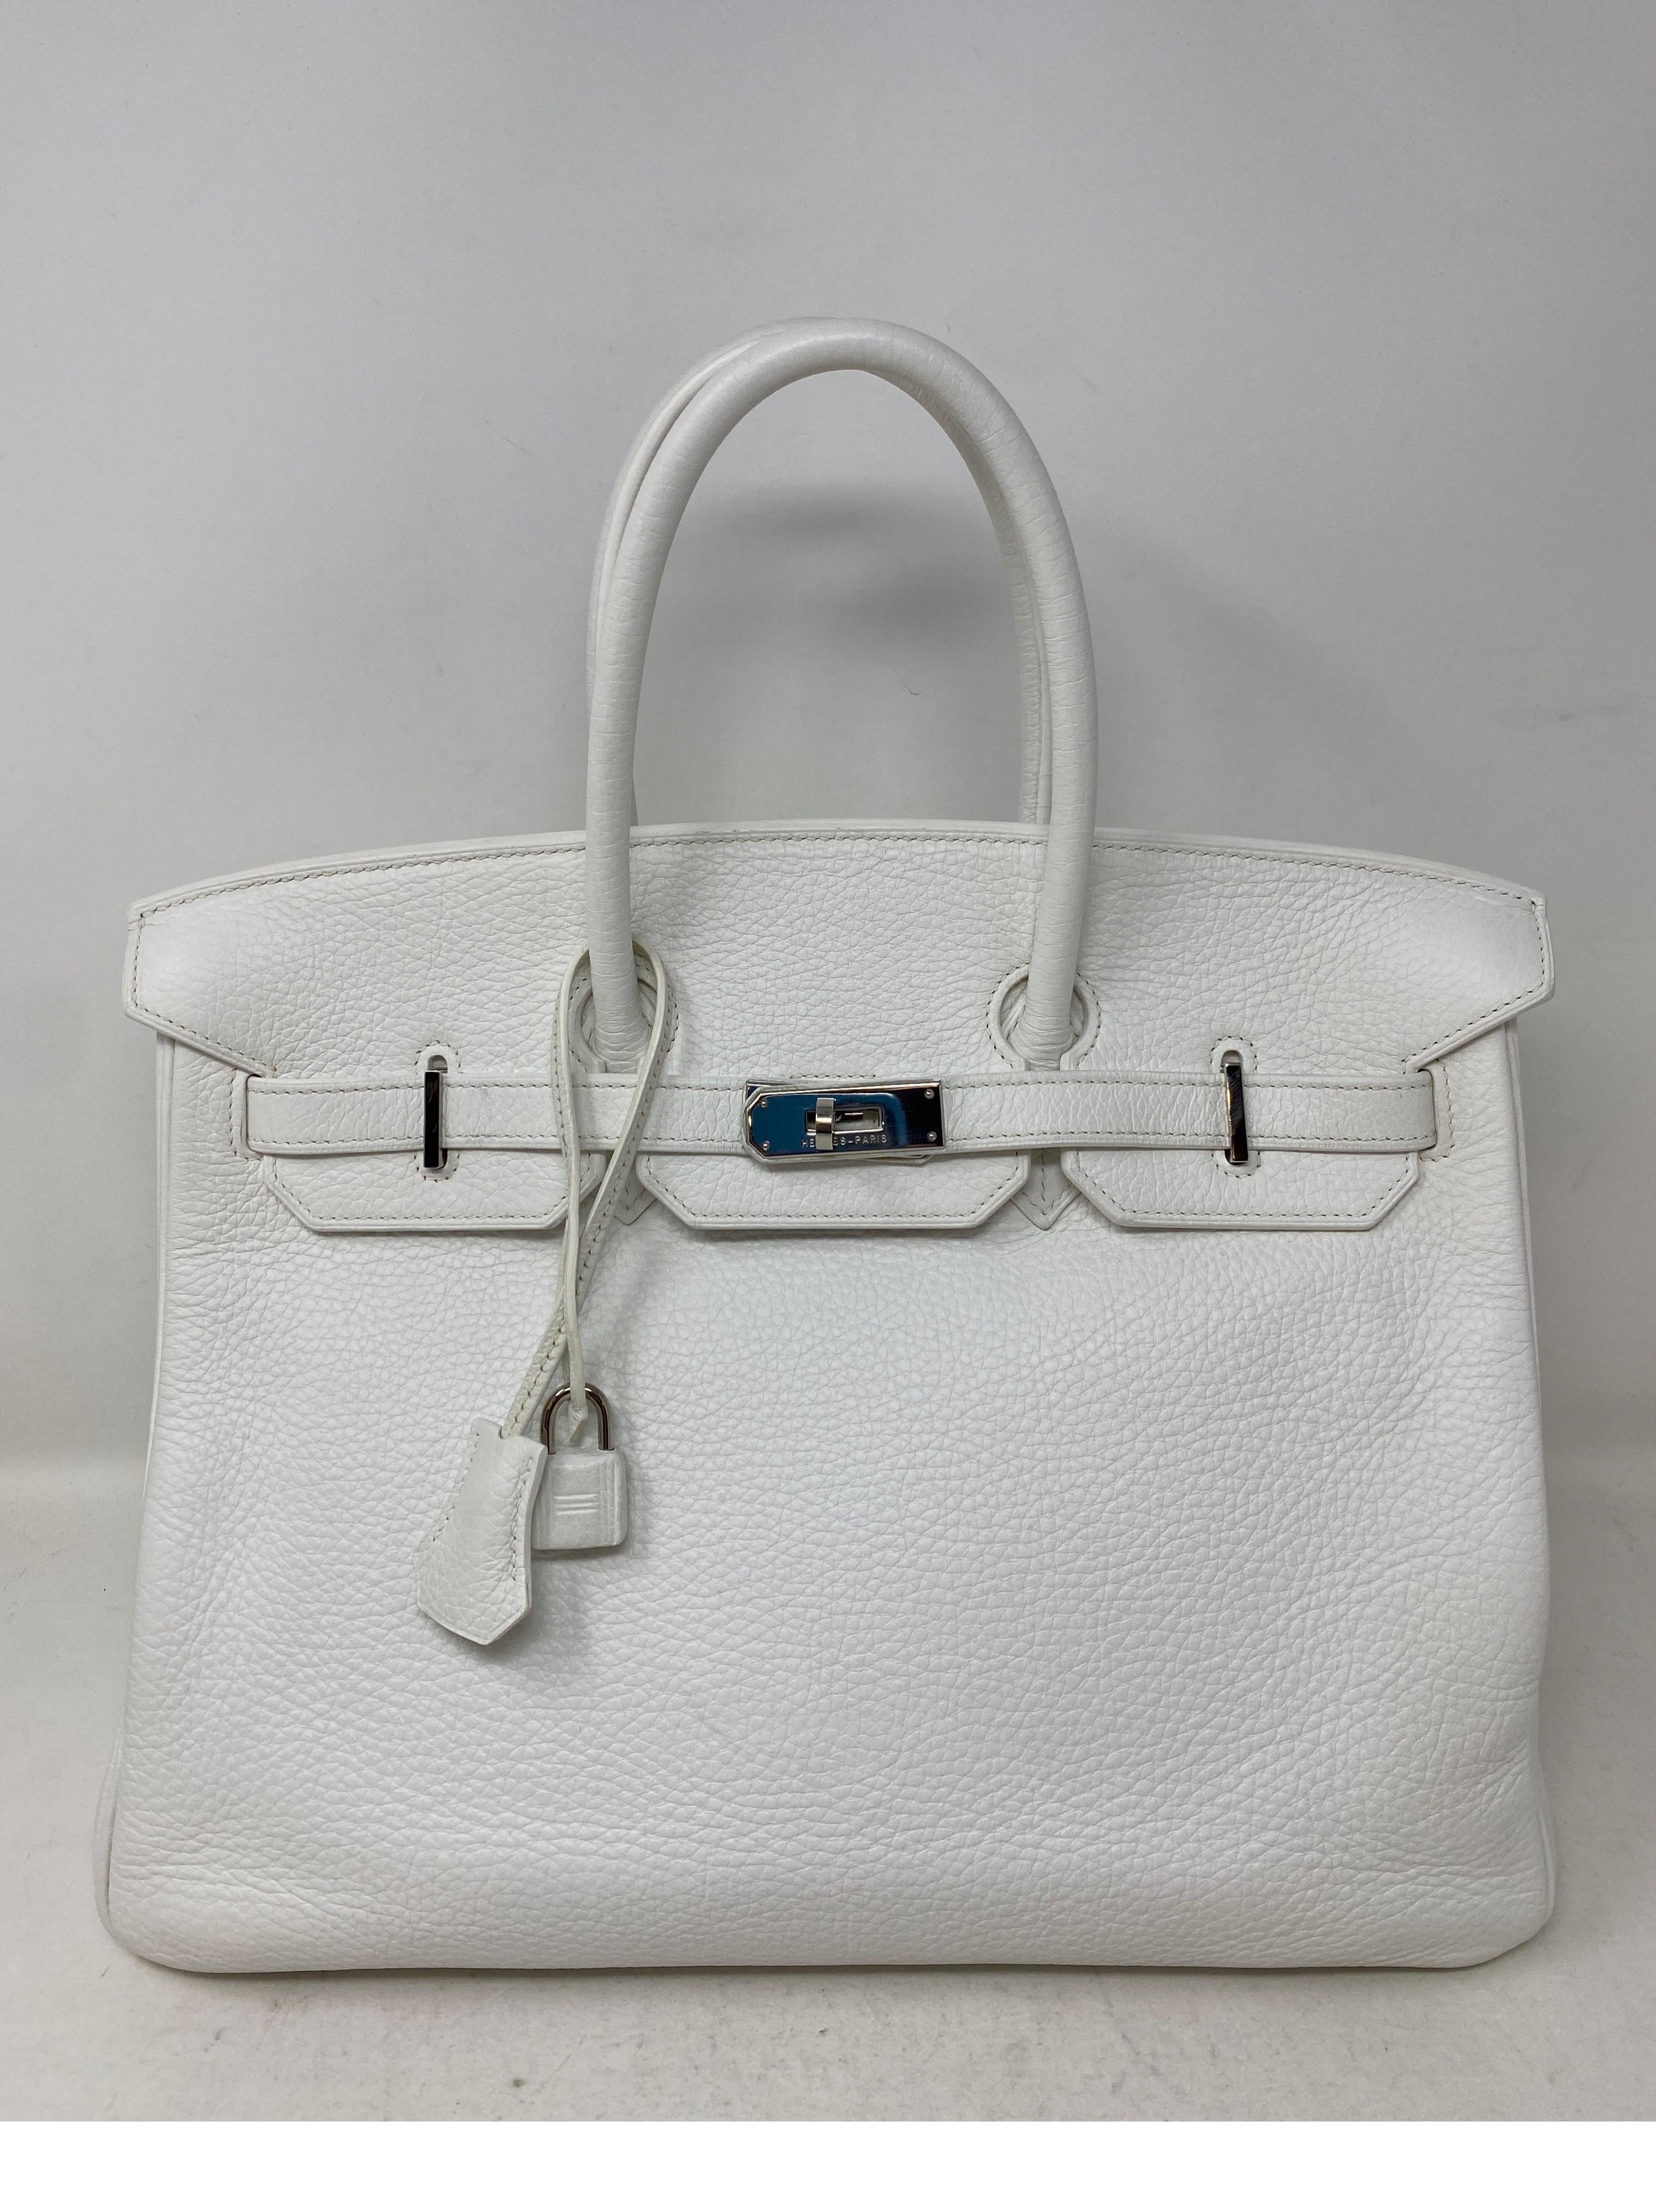 Hermes White Birkin Bag. Stunning rare white clemence leather. Palladium hardware. Good condition. Includes clochette, lock, keys, and dust cover. Guaranteed authentic. 